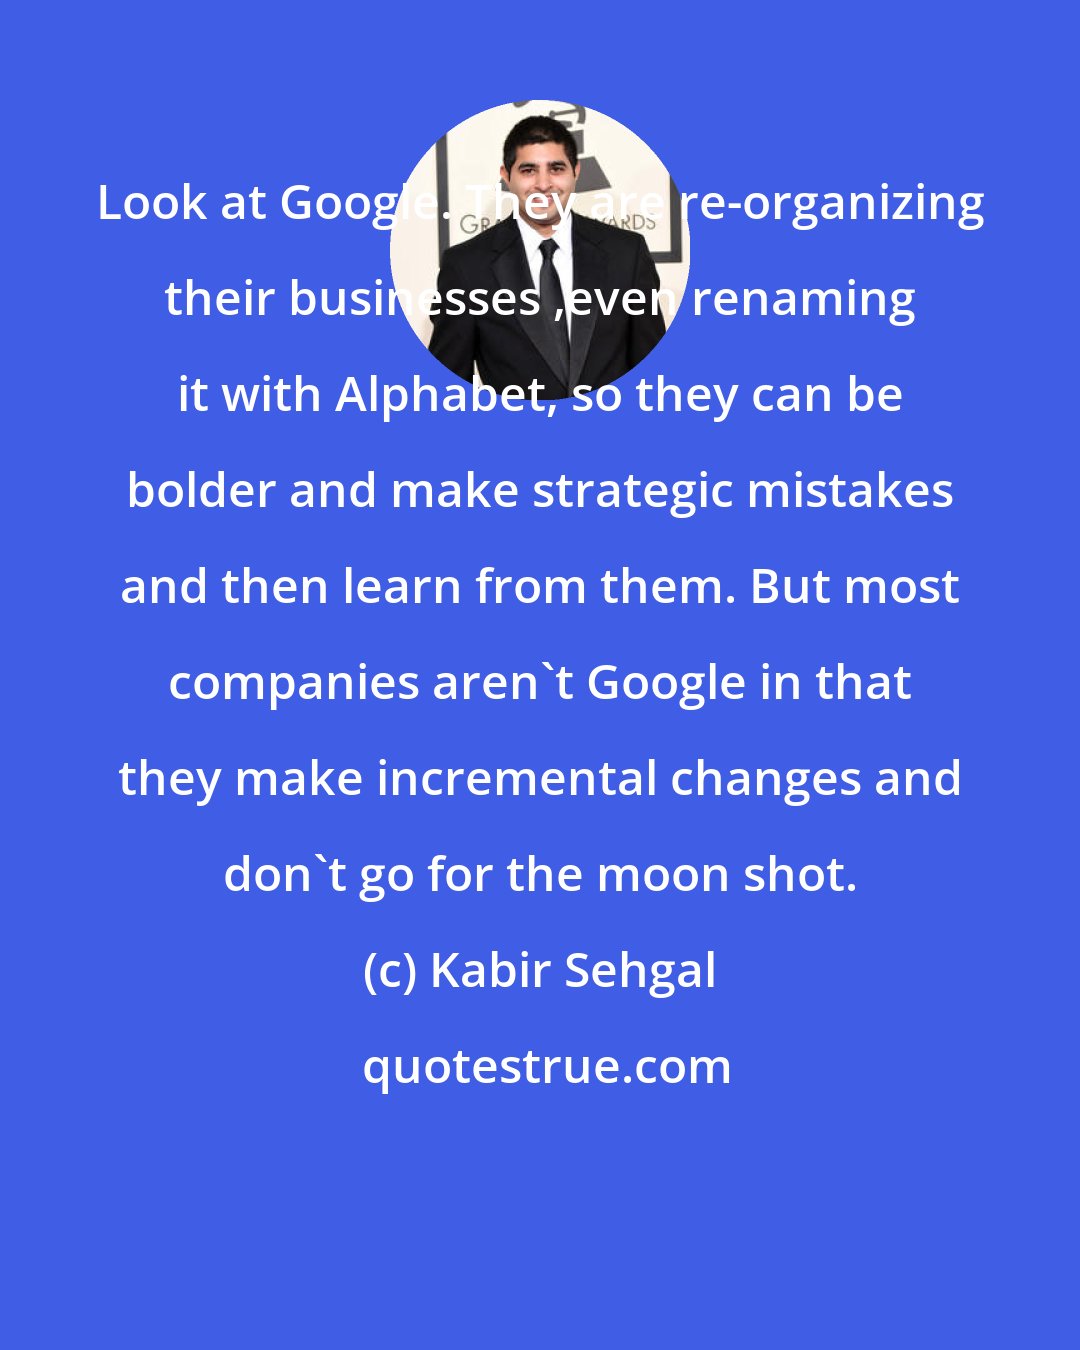 Kabir Sehgal: Look at Google. They are re-organizing their businesses ,even renaming it with Alphabet, so they can be bolder and make strategic mistakes and then learn from them. But most companies aren't Google in that they make incremental changes and don't go for the moon shot.